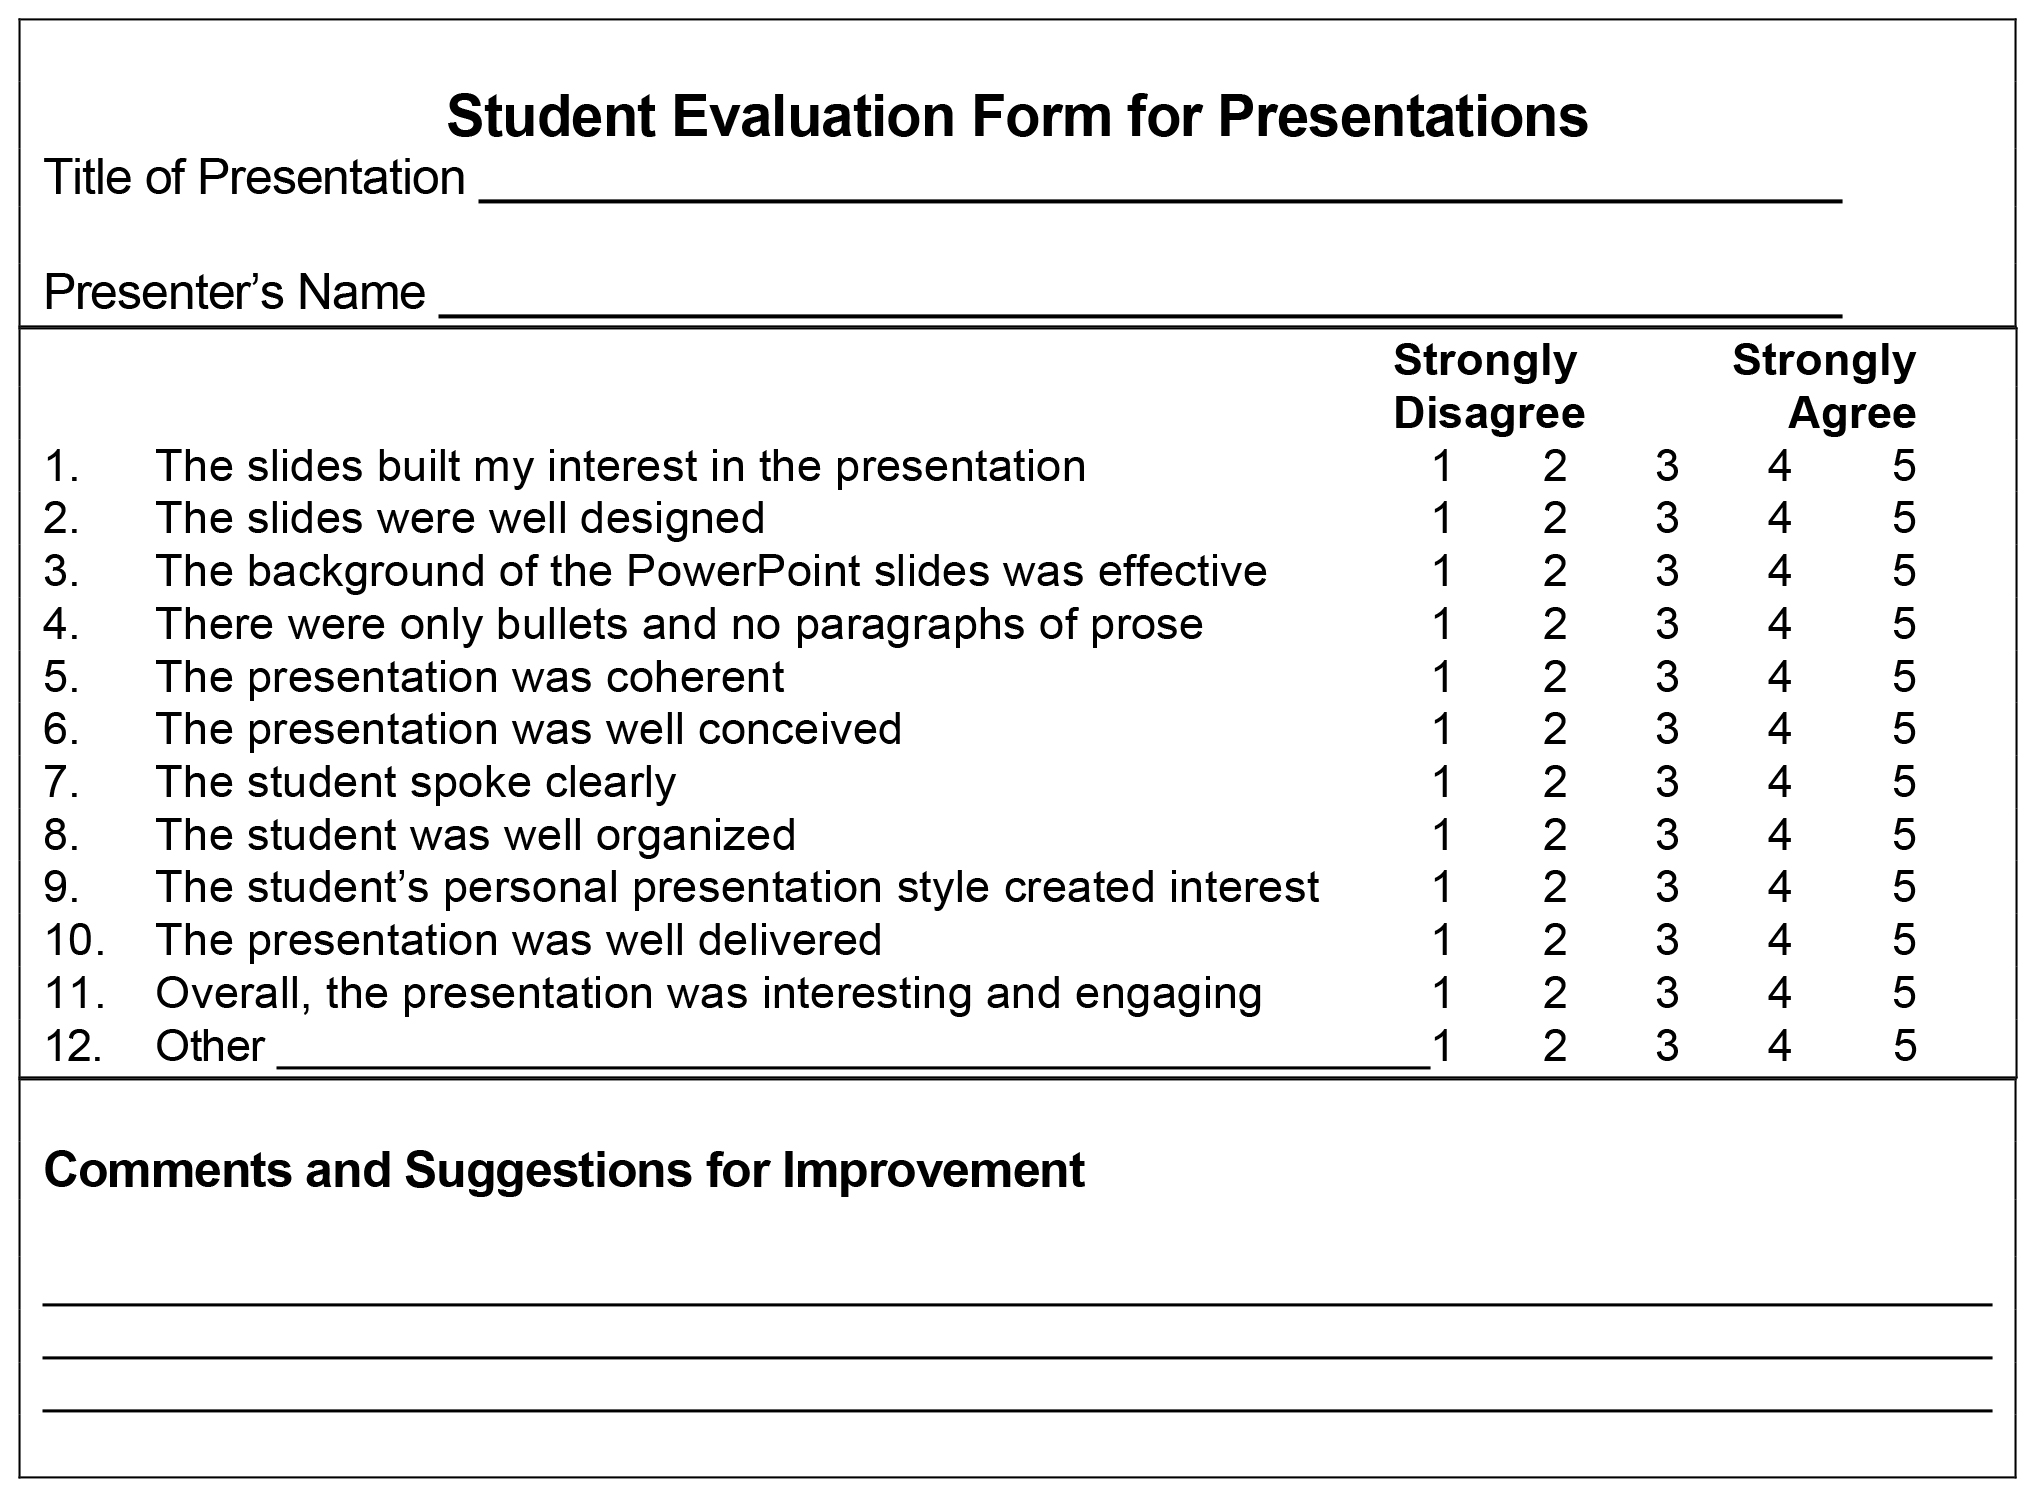 how to evaluate student presentation